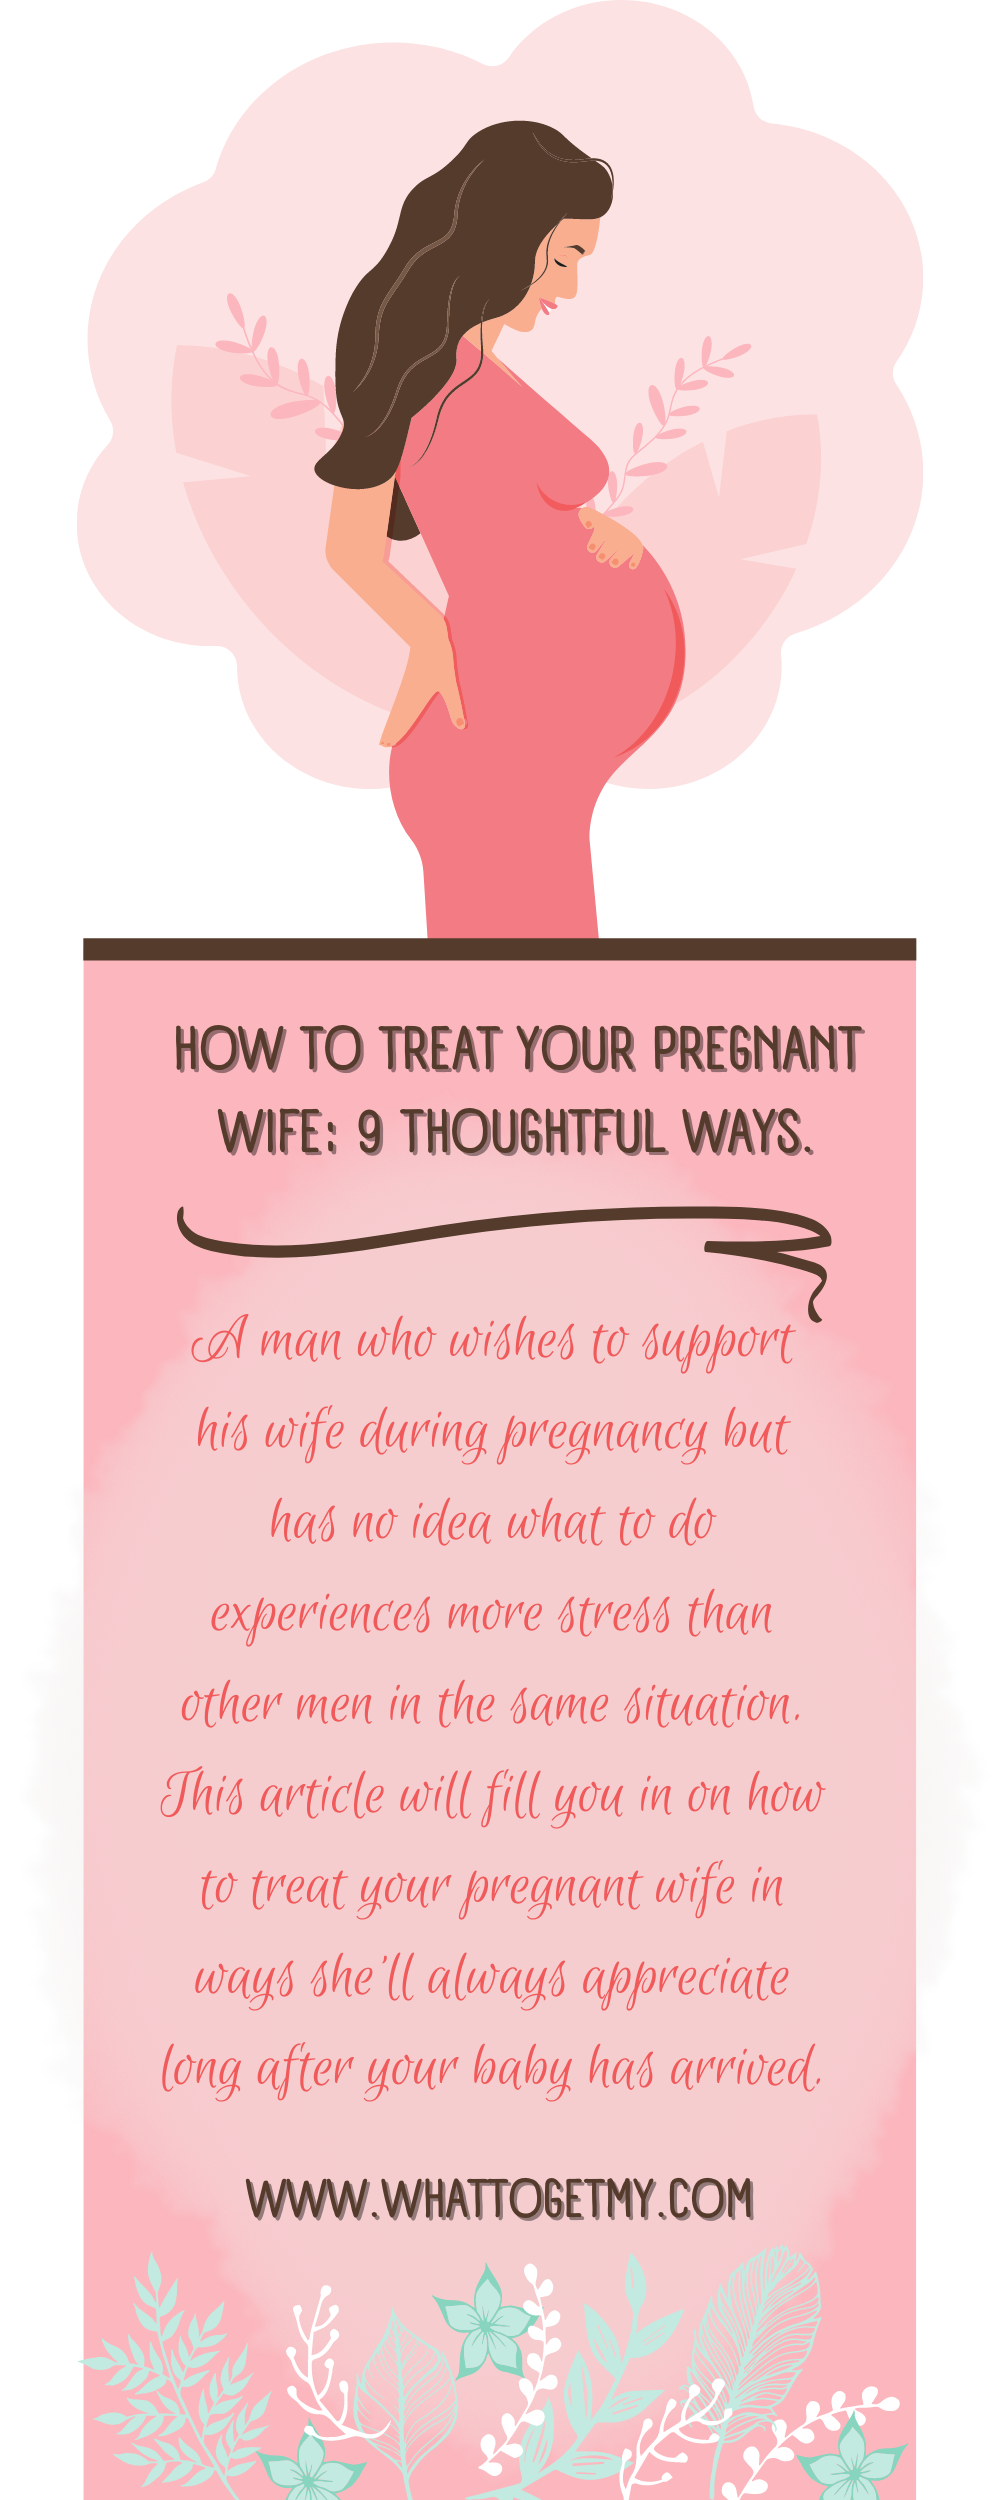 how to treat your pregnant wife?